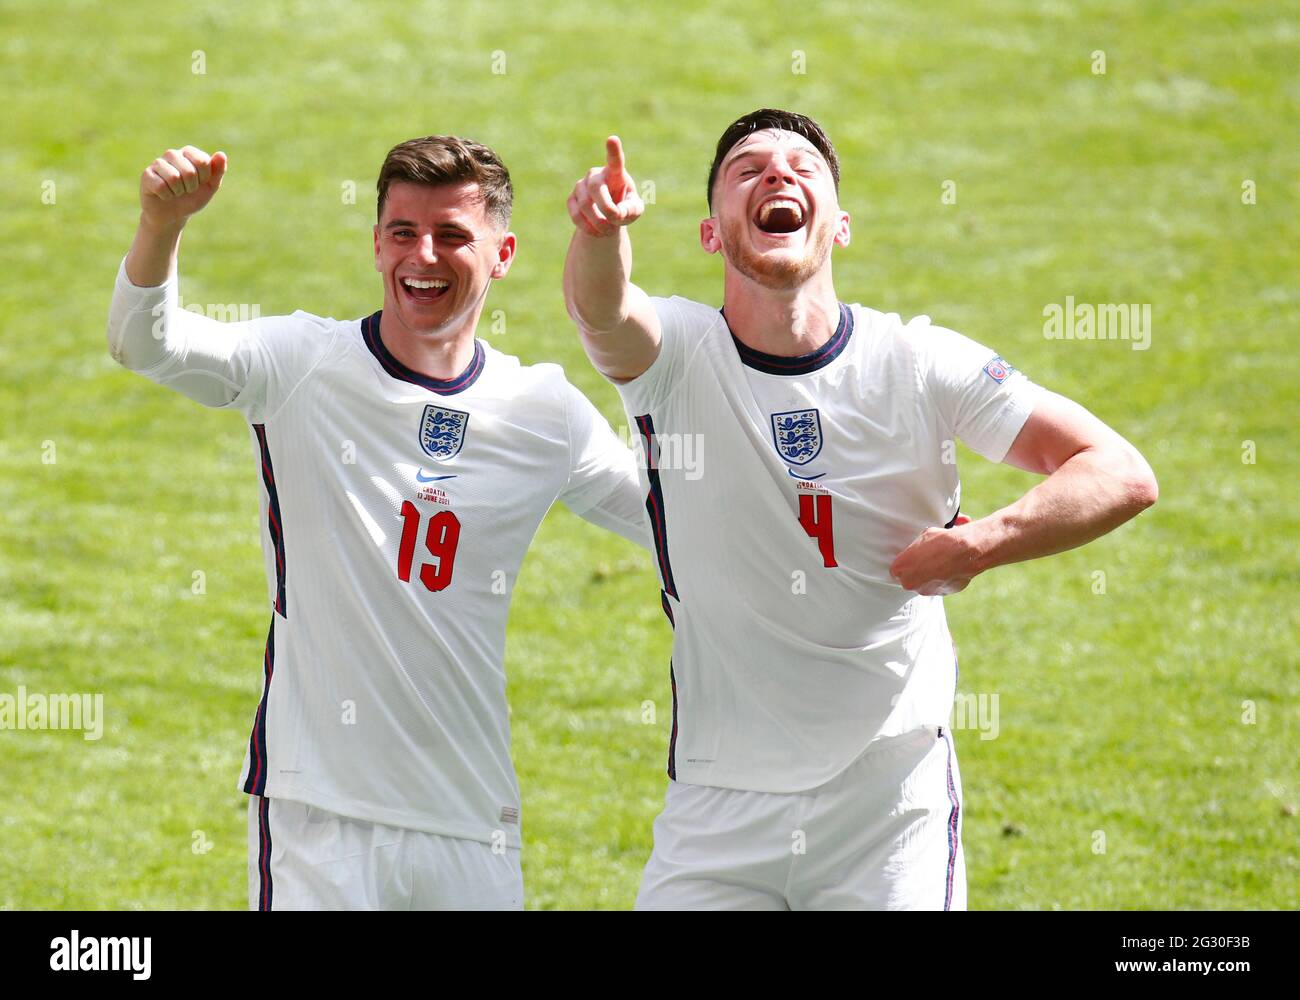 London, UK. 13th June, 2021. WEMBLEY, United Kingdom, JUNE 13:L-R Mason Mount (Chelsea) of England and Declan Rice (West Ham) of England after European Championship Group D between England and Croatia at Wembley stadium, London on 13th June, 2021 Credit: Action Foto Sport/Alamy Live News Stock Photo